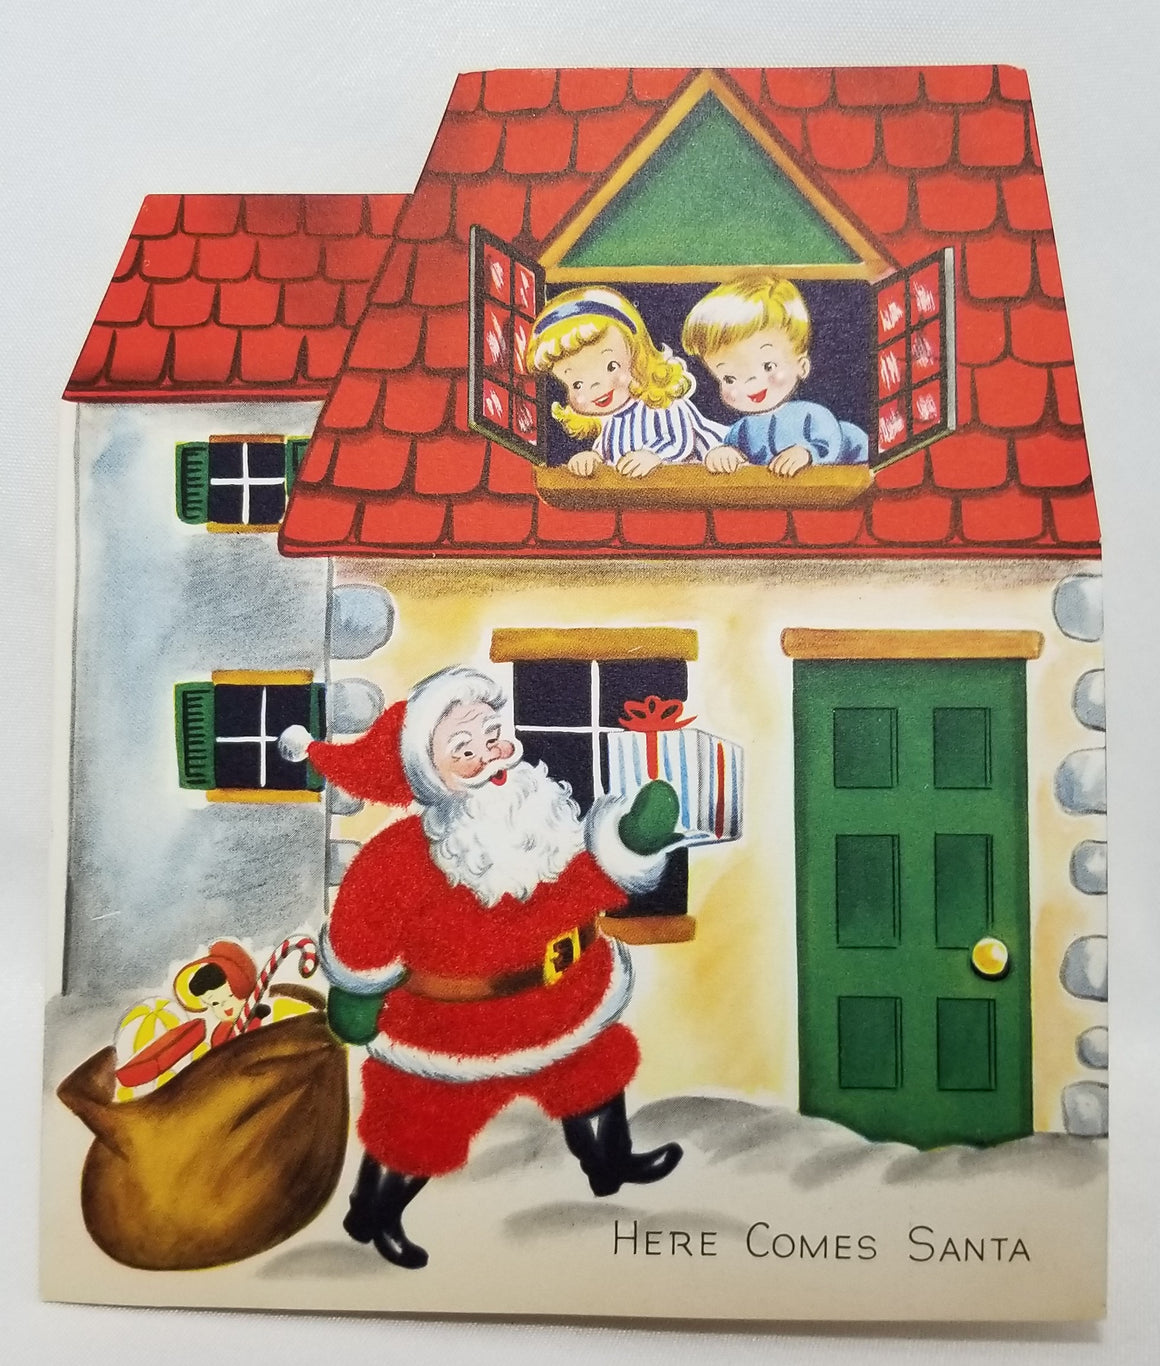 Here Comes Santa Die Cut Christmas Card St Nick with Children in Snow Covered House 1950s